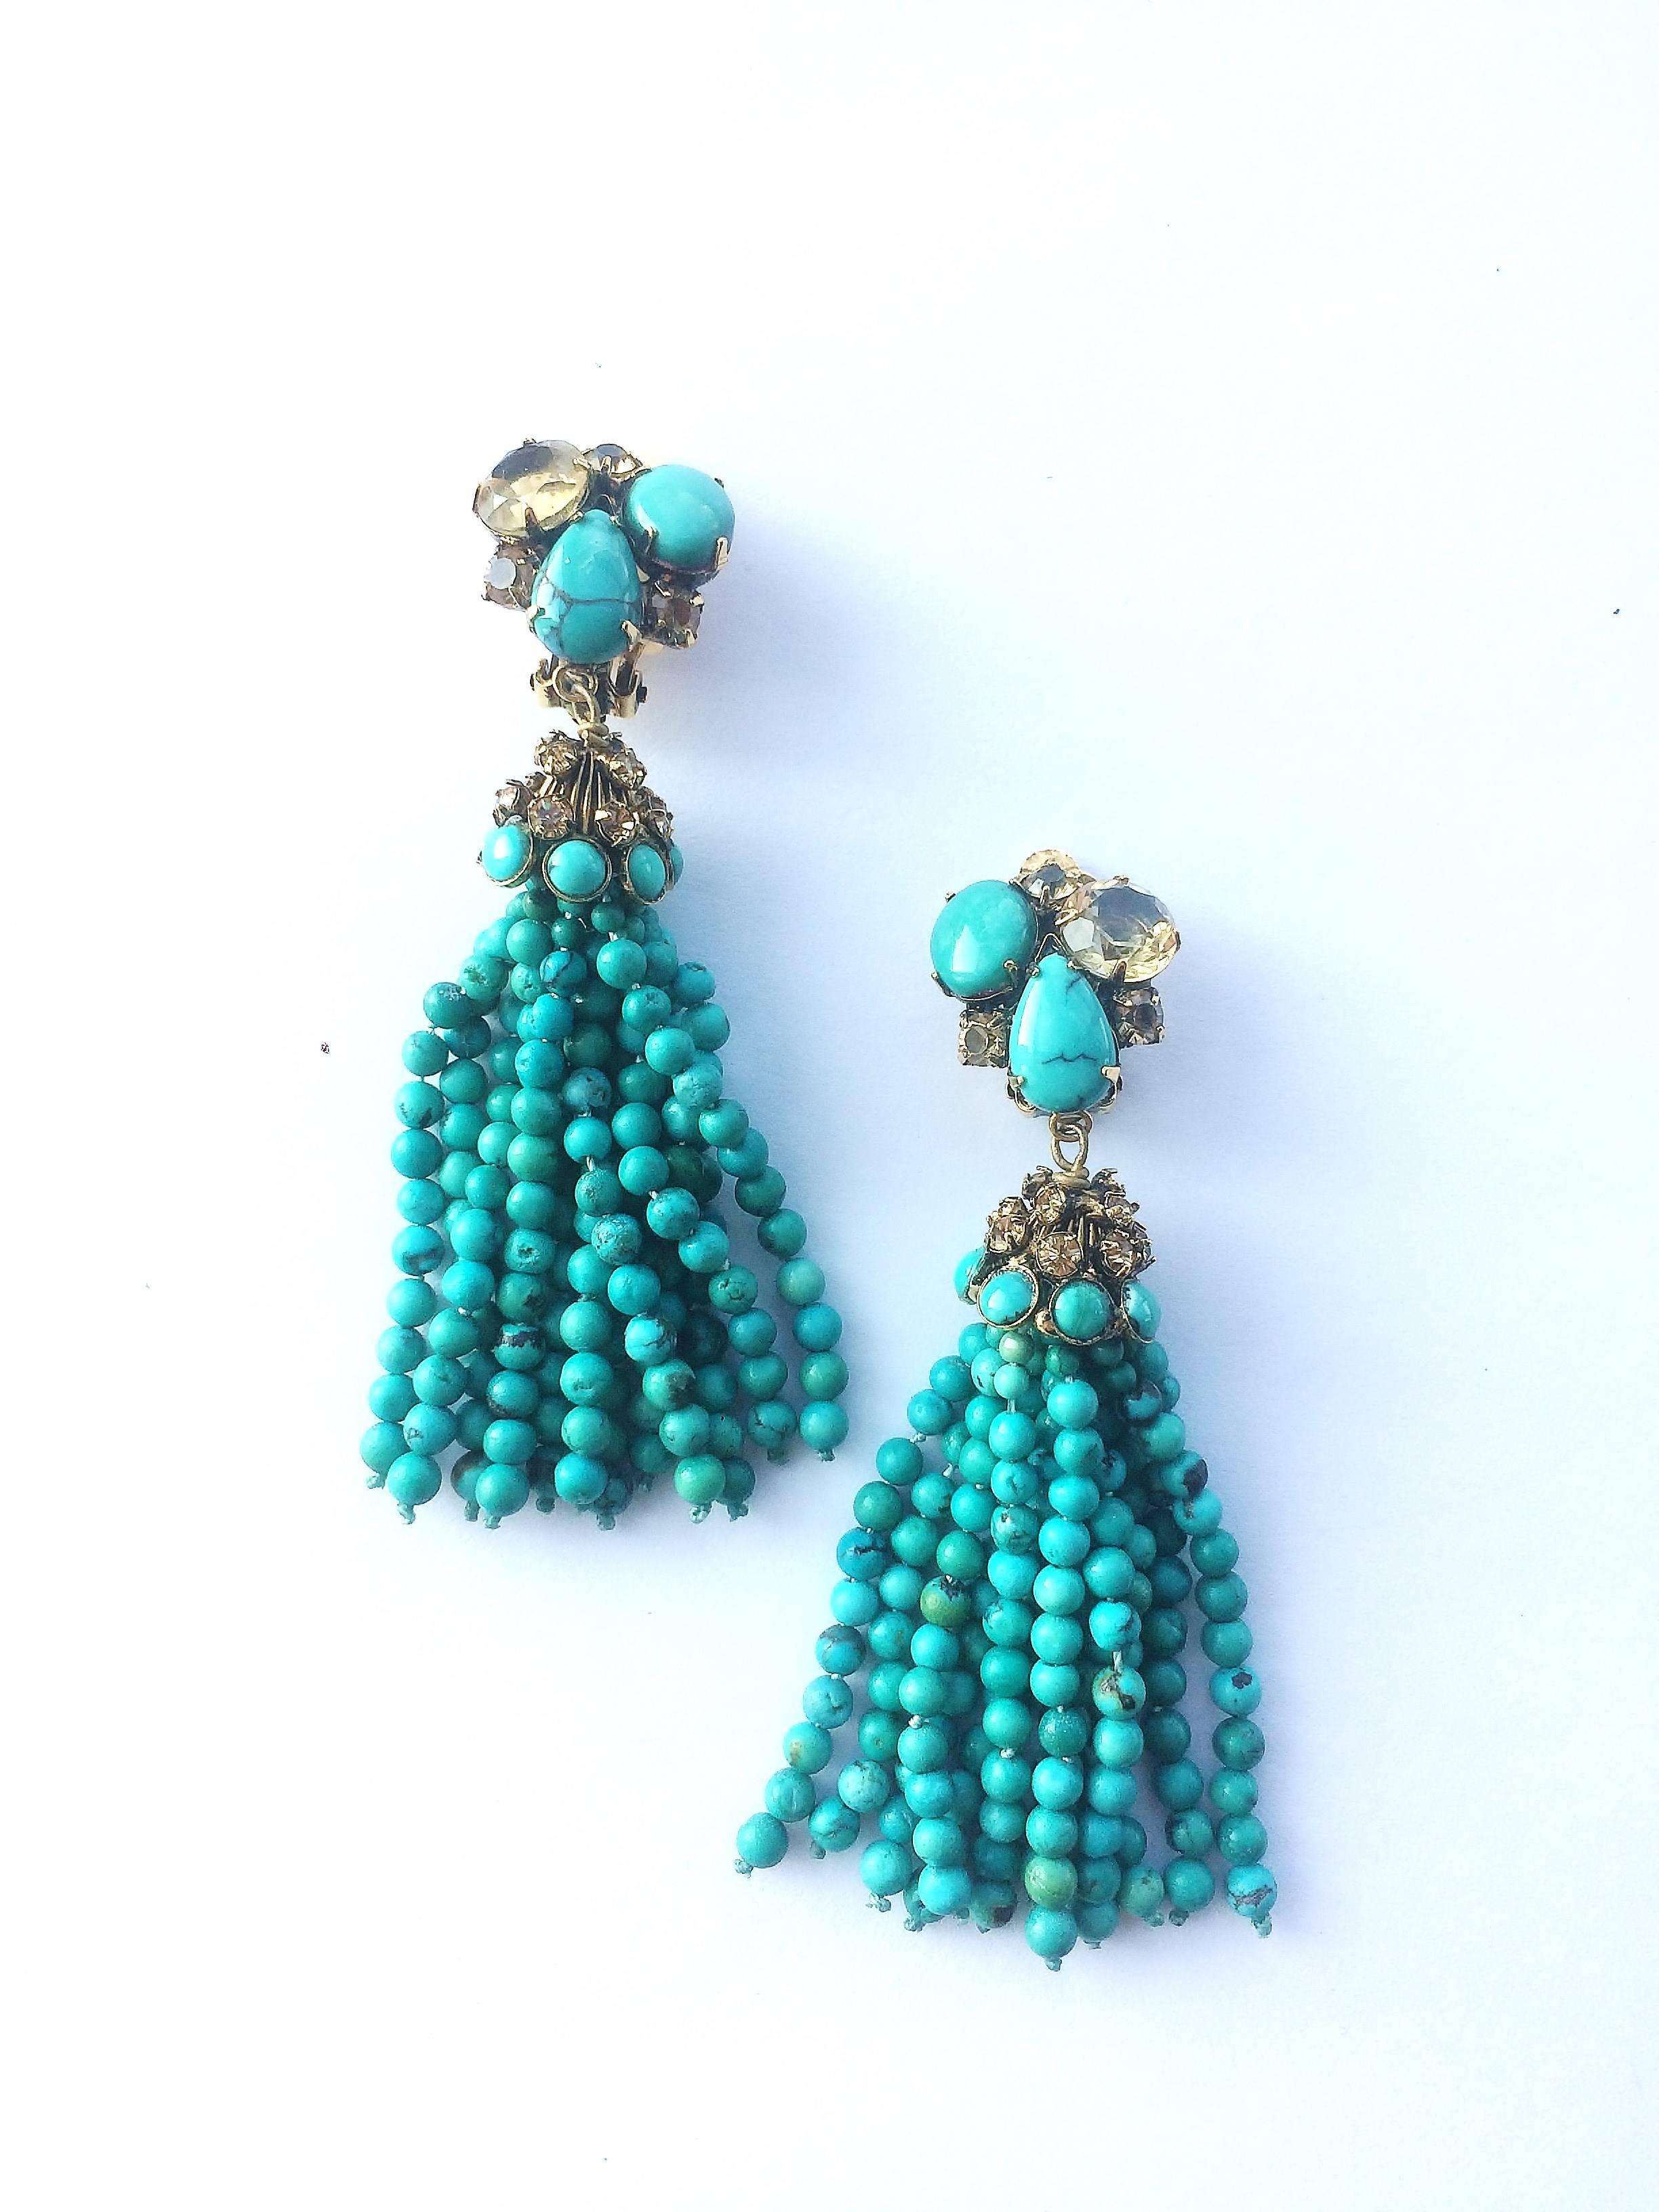 A subtle and magical colour combination of strong turquoise and soft citrine, highlighted with bohemian bronze pastes, set in gilt metal, set these earrings apart. Handmade by the studio of Iradj Moini, they form  'tassles' of turquoises, with